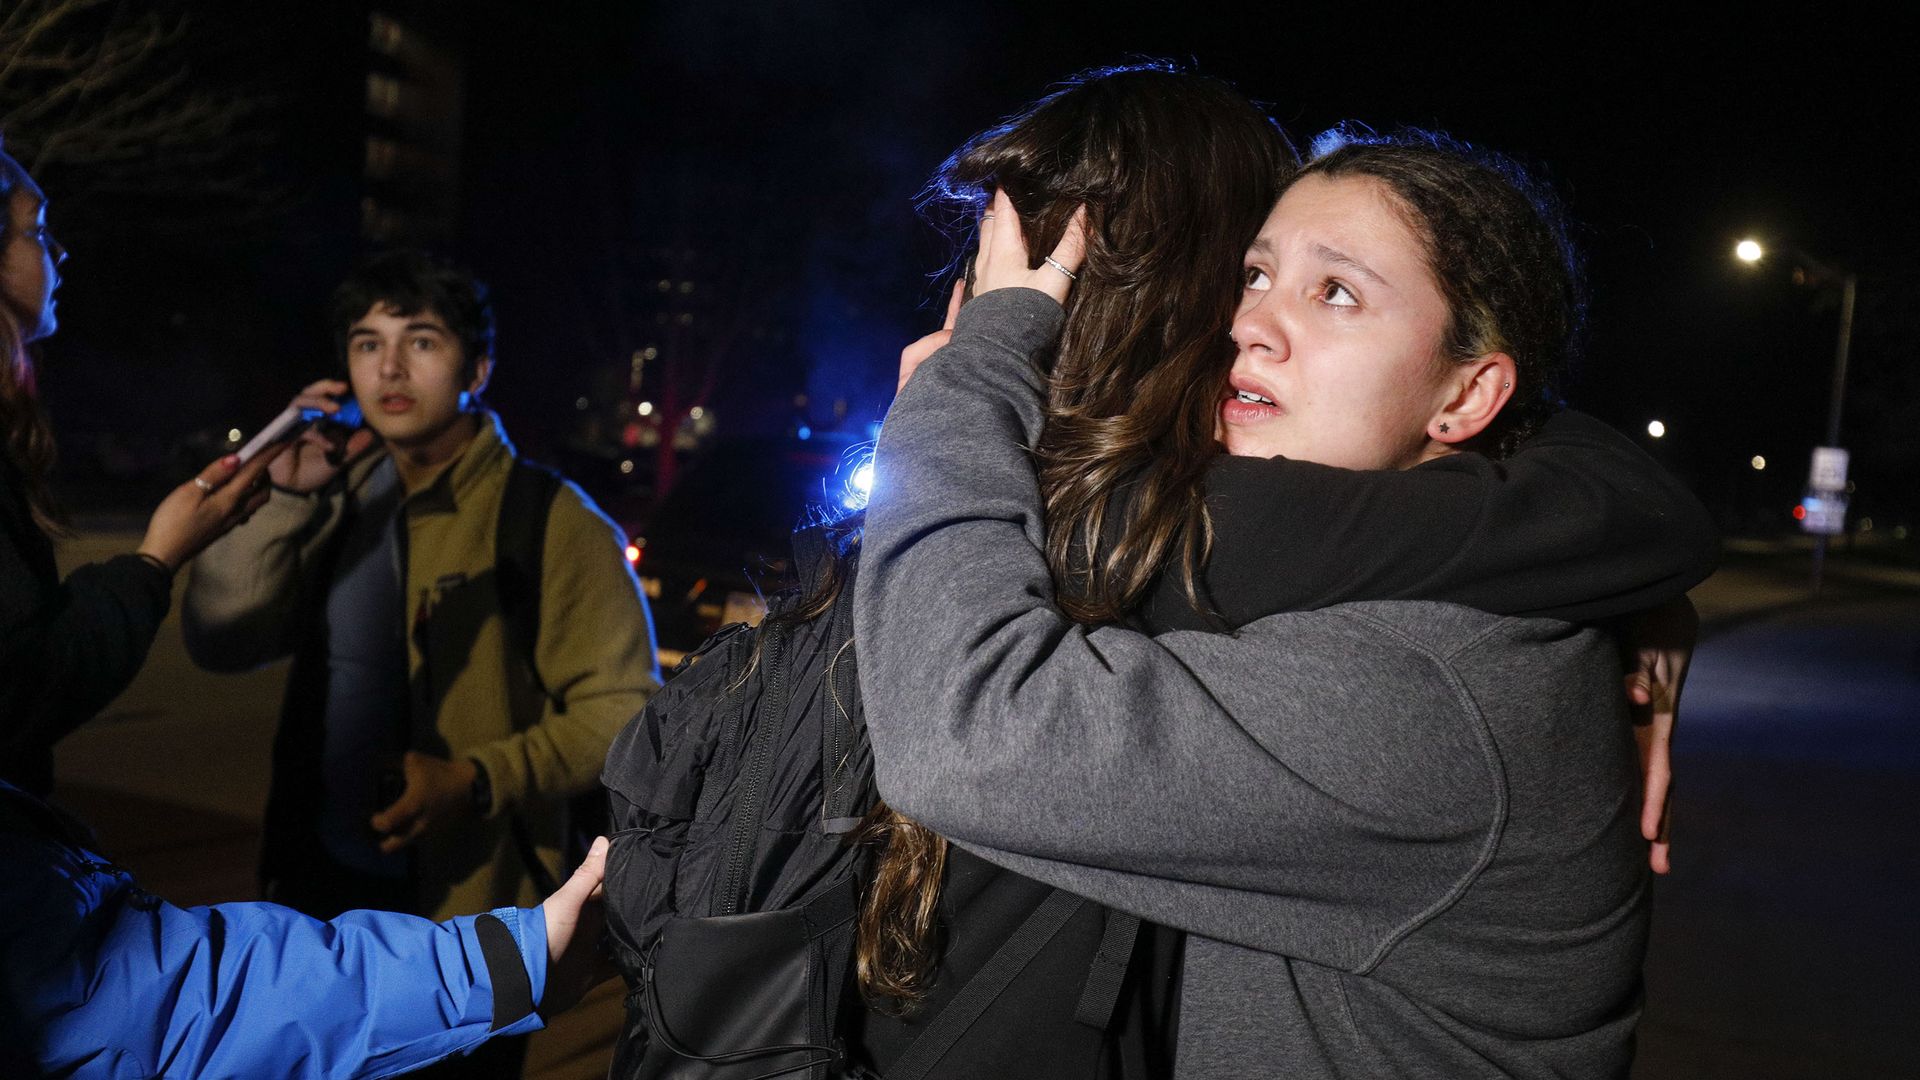 MSU students hug during an active shooter situation on campus Monday.